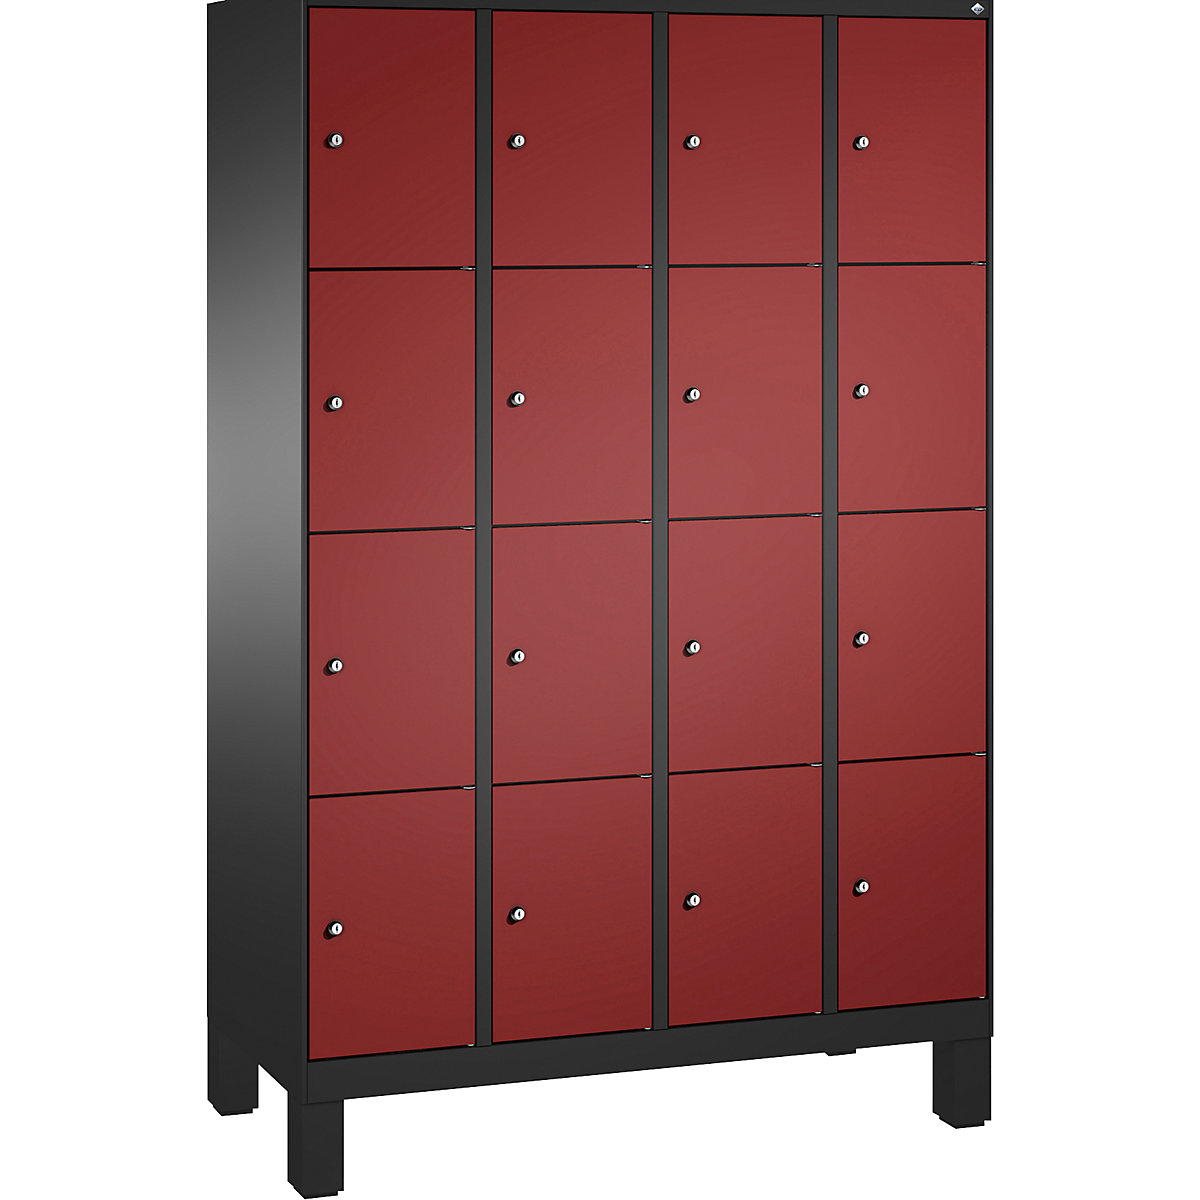 EVOLO locker unit, with feet – C+P, 4 compartments, 4 shelf compartments each, compartment width 300 mm, black grey / ruby red-8